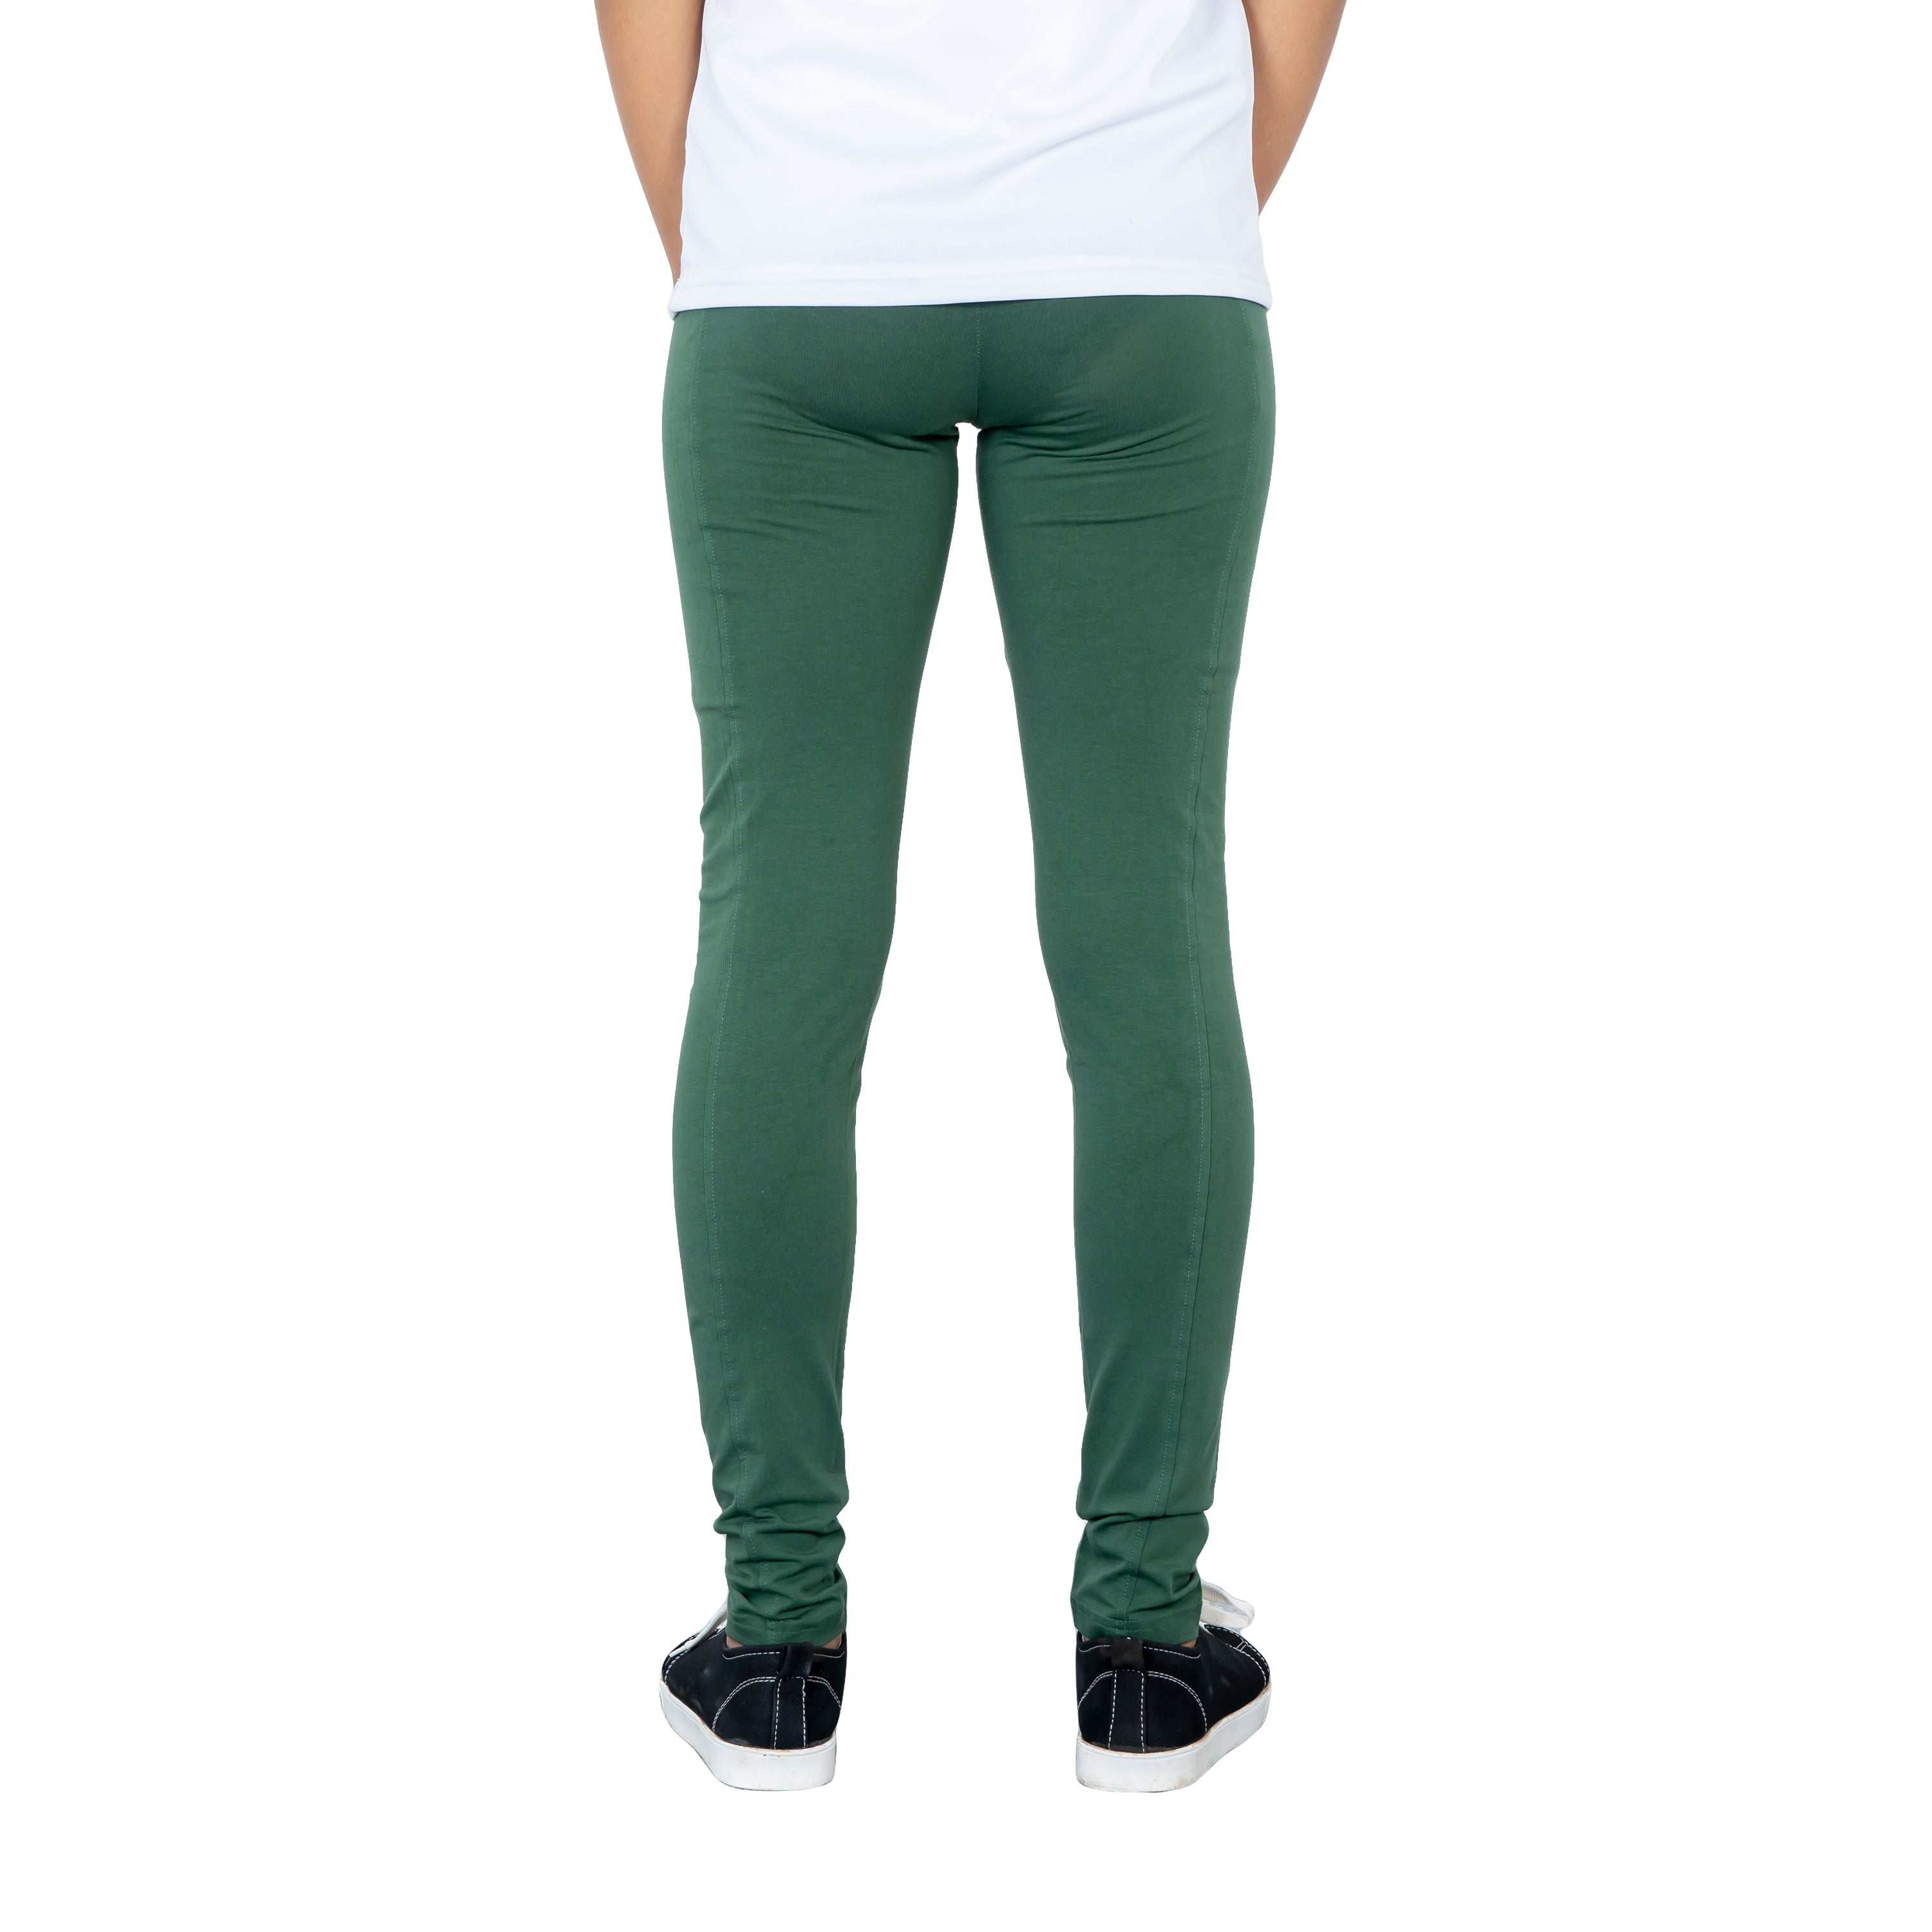 Dark Green Adults Leggings with Pockets